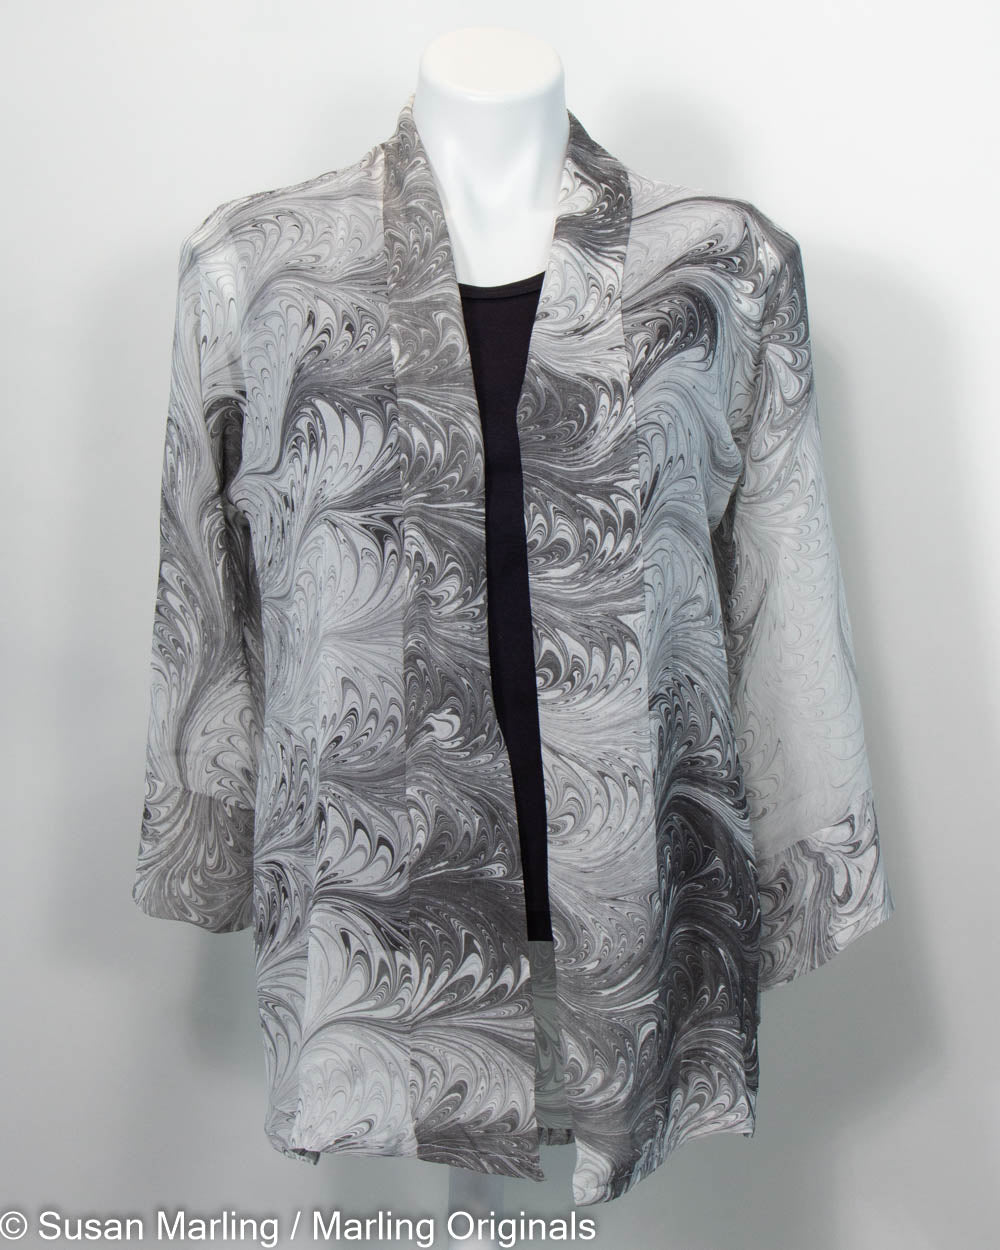 sheer silk kimono in a marbled print of charcoal and white